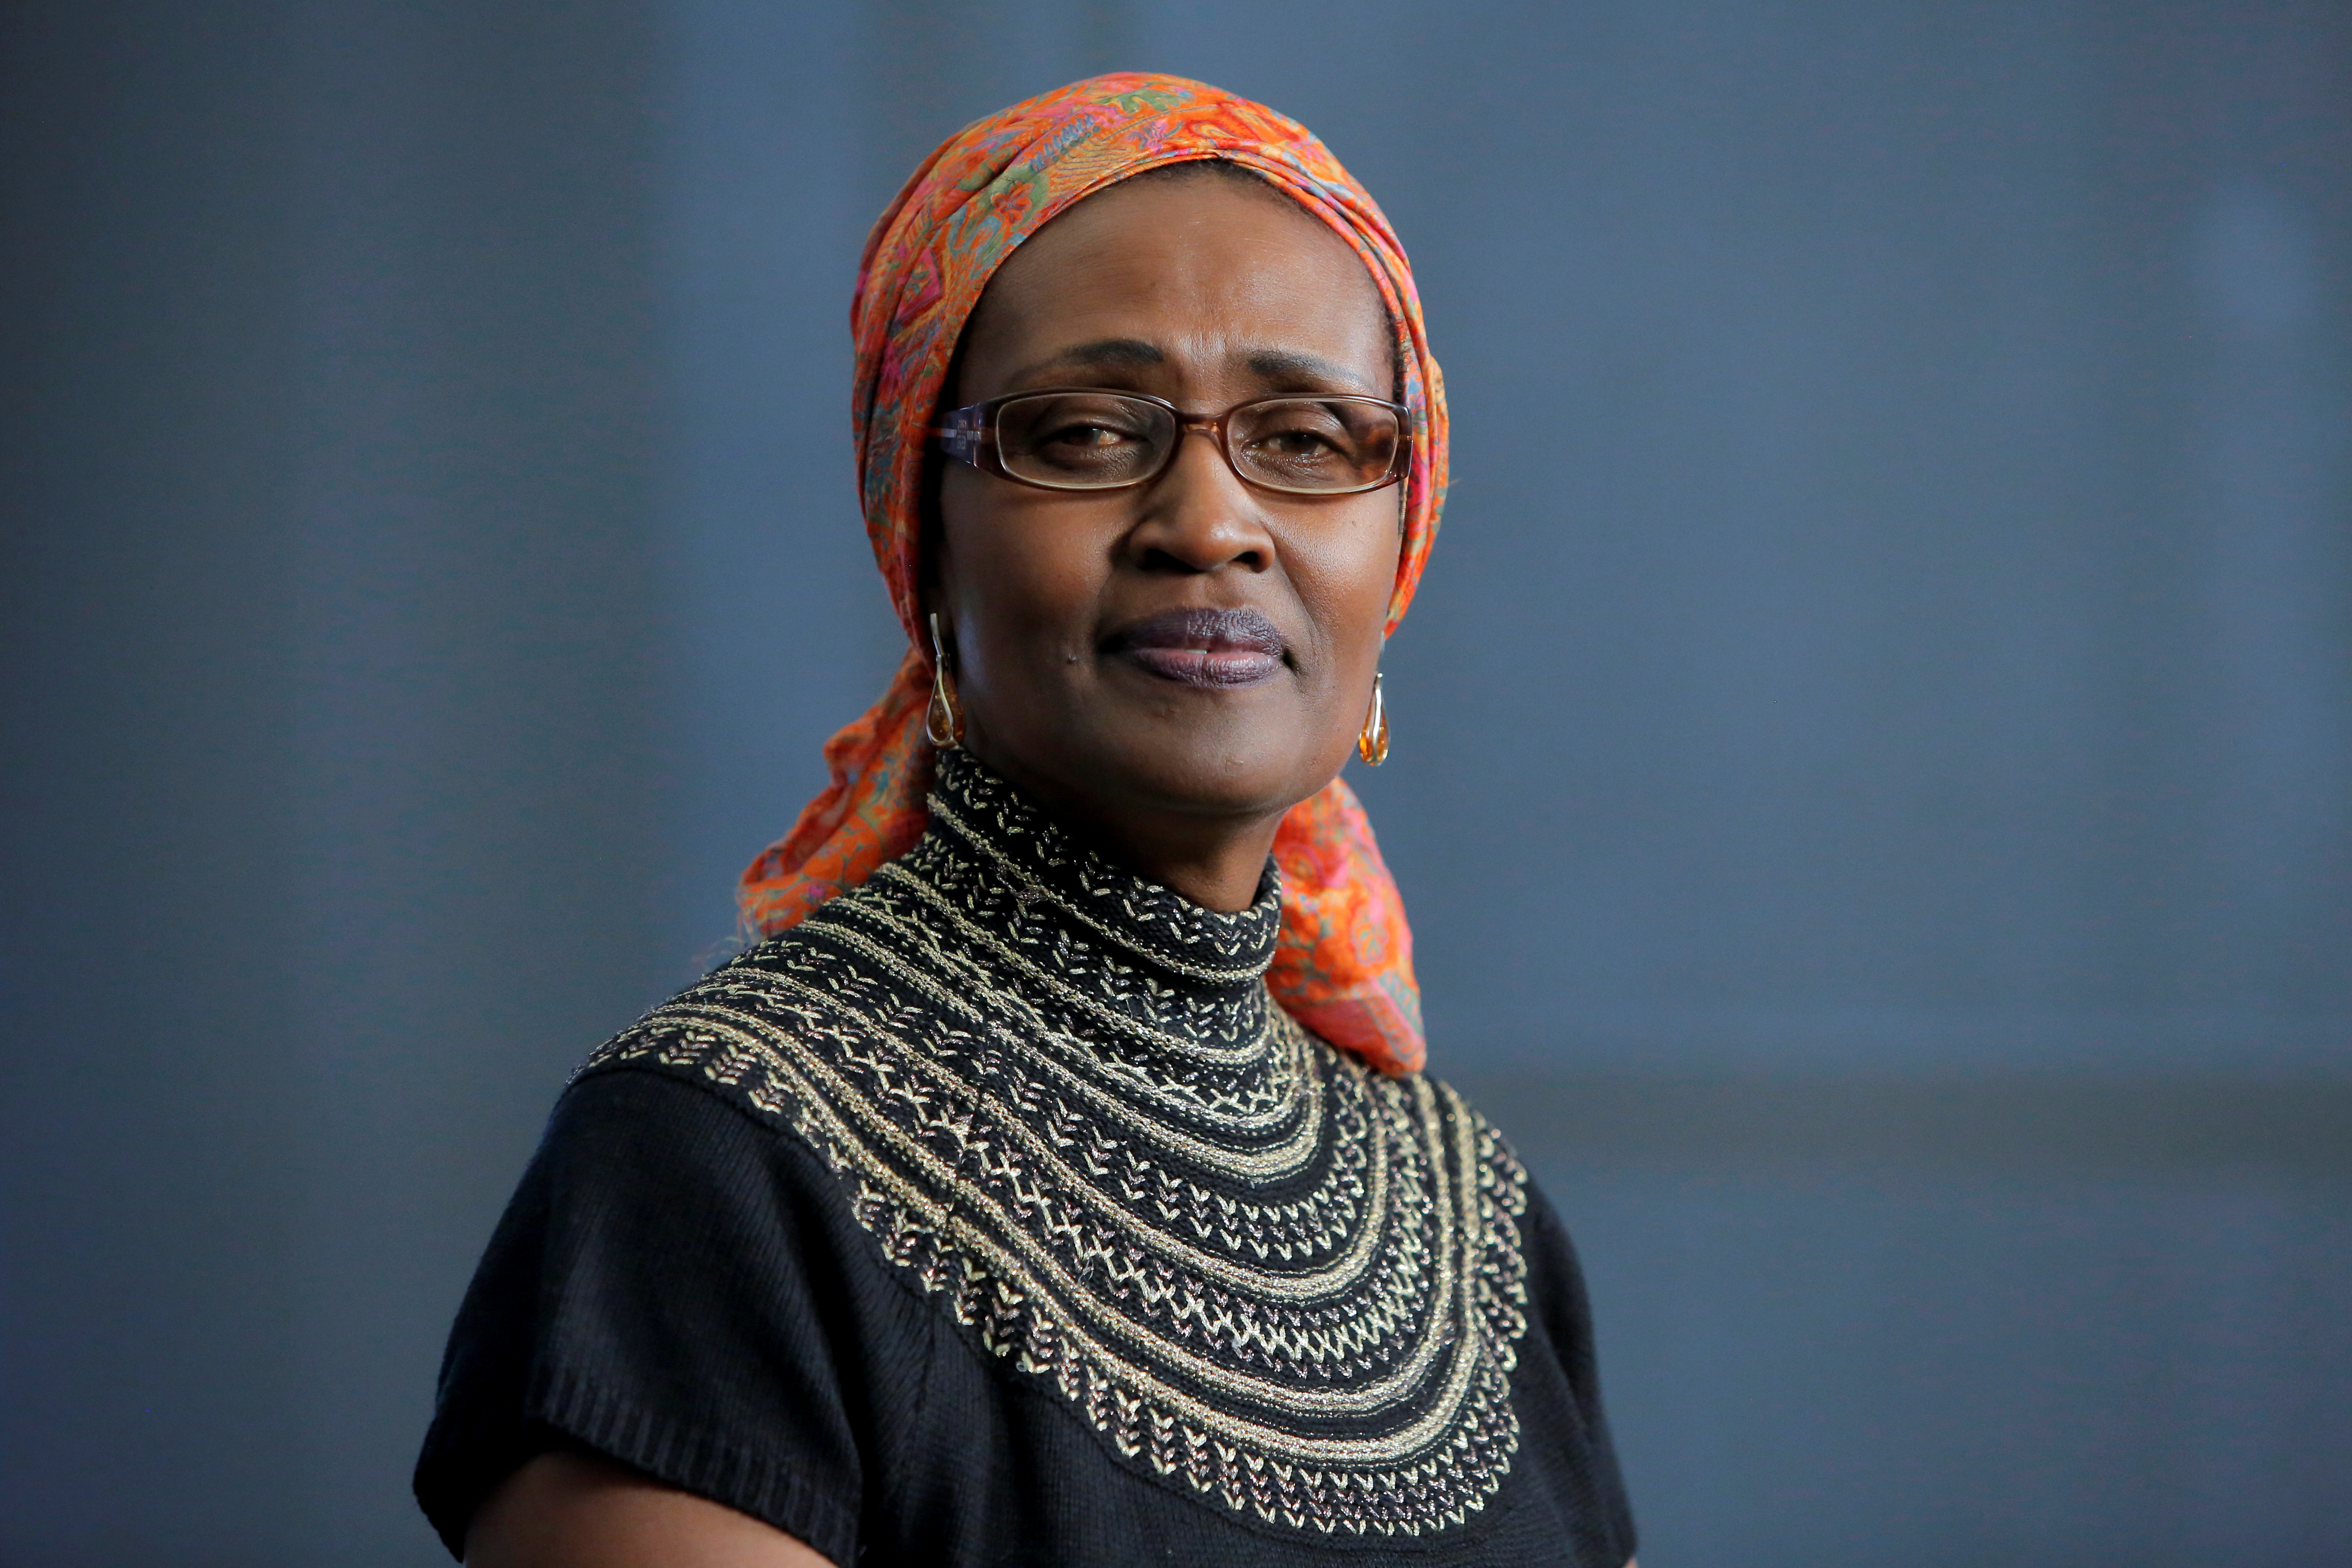  UNAIDS Executive Director  Winnie Byanyima poses for a portrait following an interview in New York, NY, U.S., February 11, 2018. REUTERS/Andrew Kelly